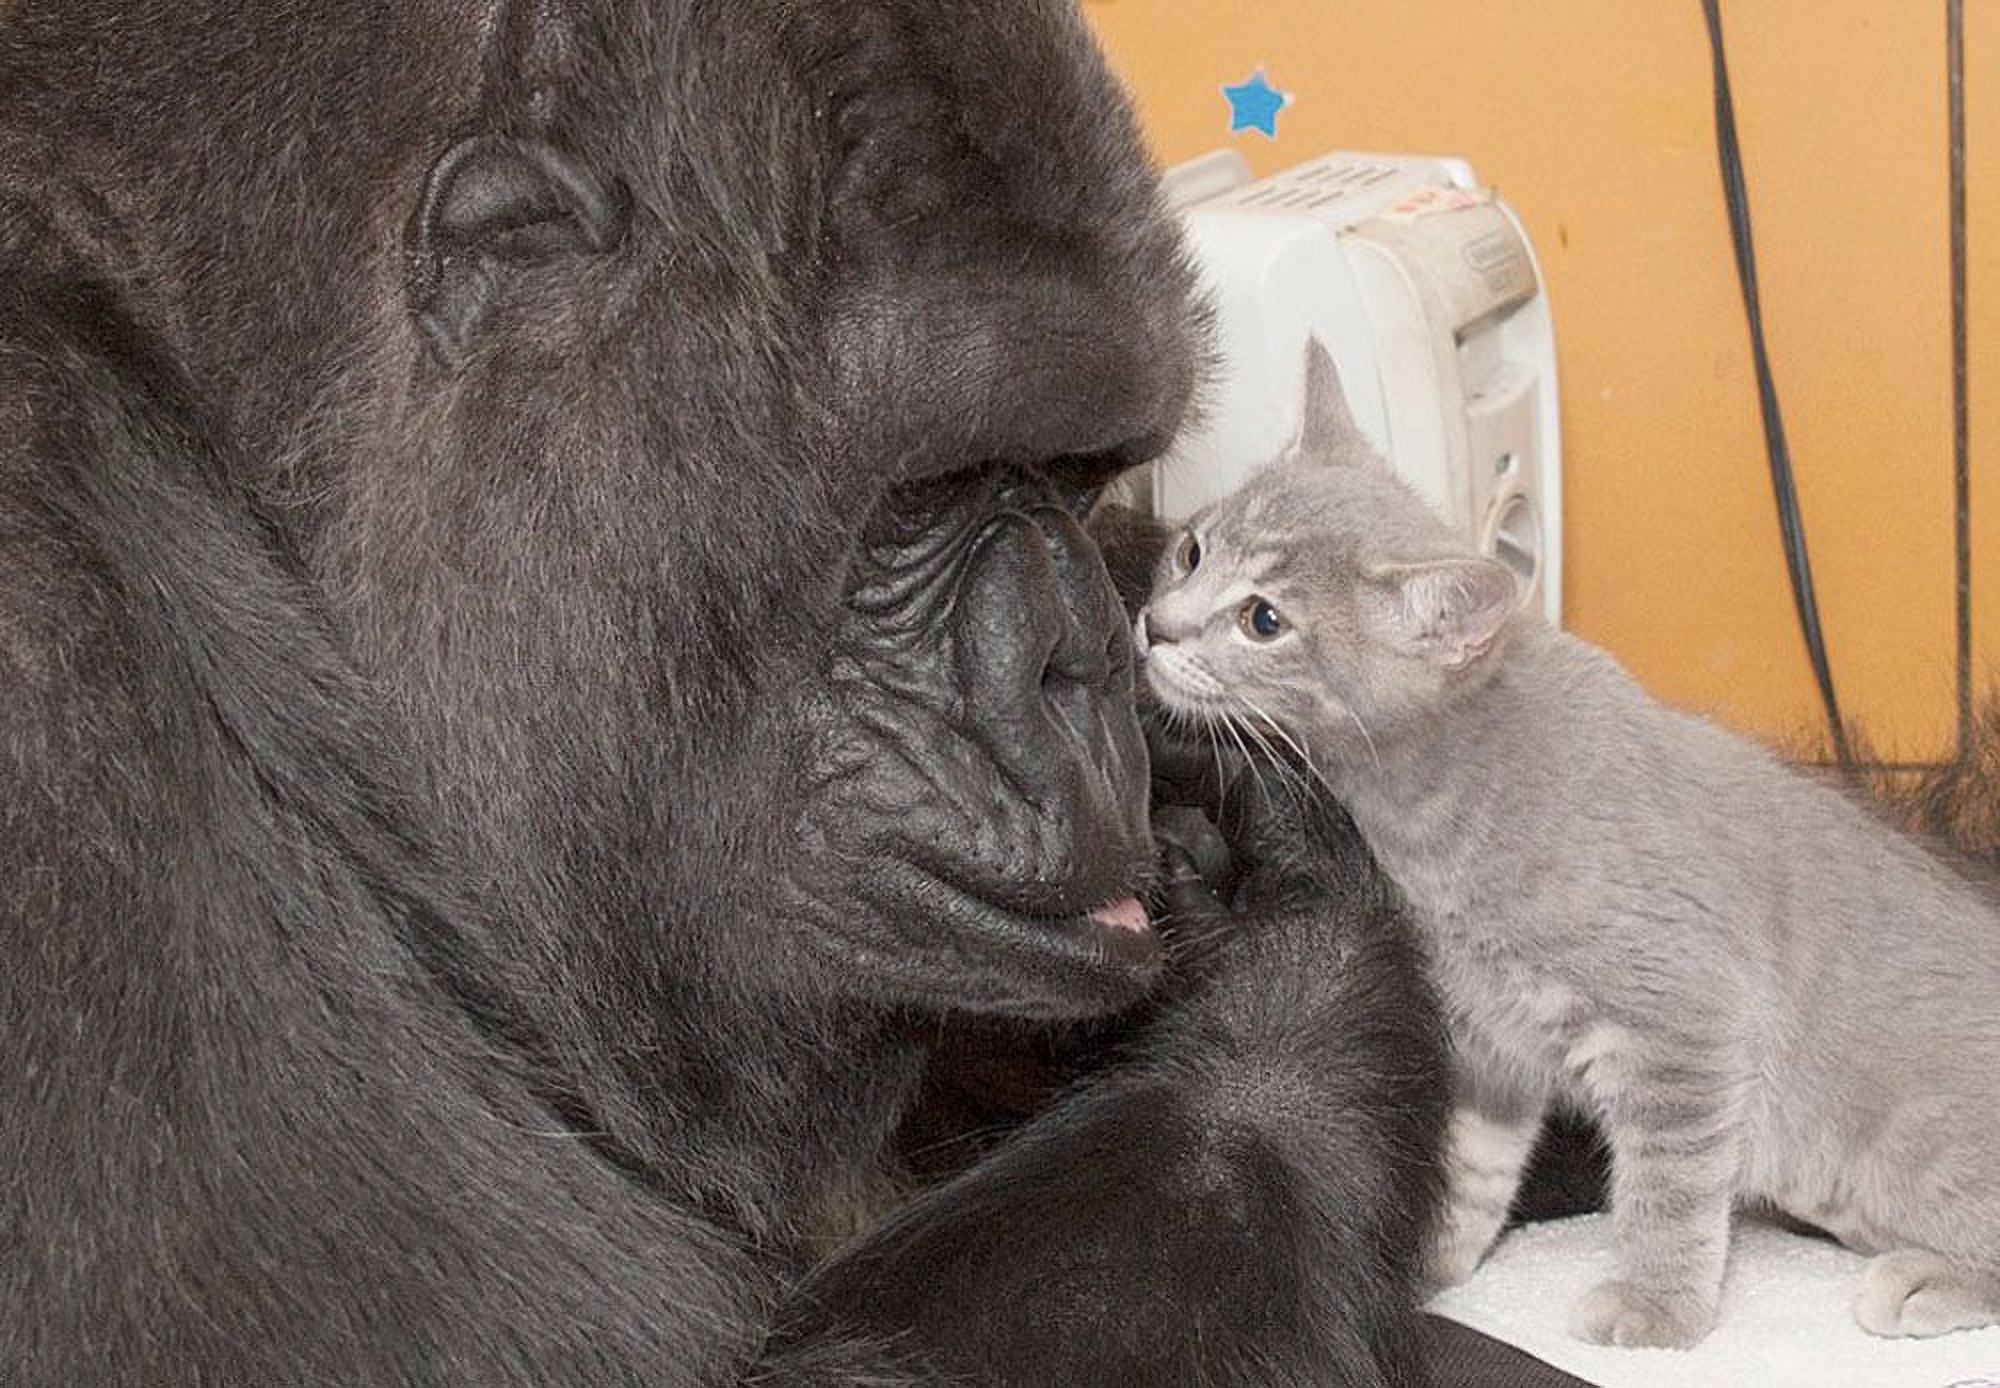 Koko sharing affection with her kitten. 